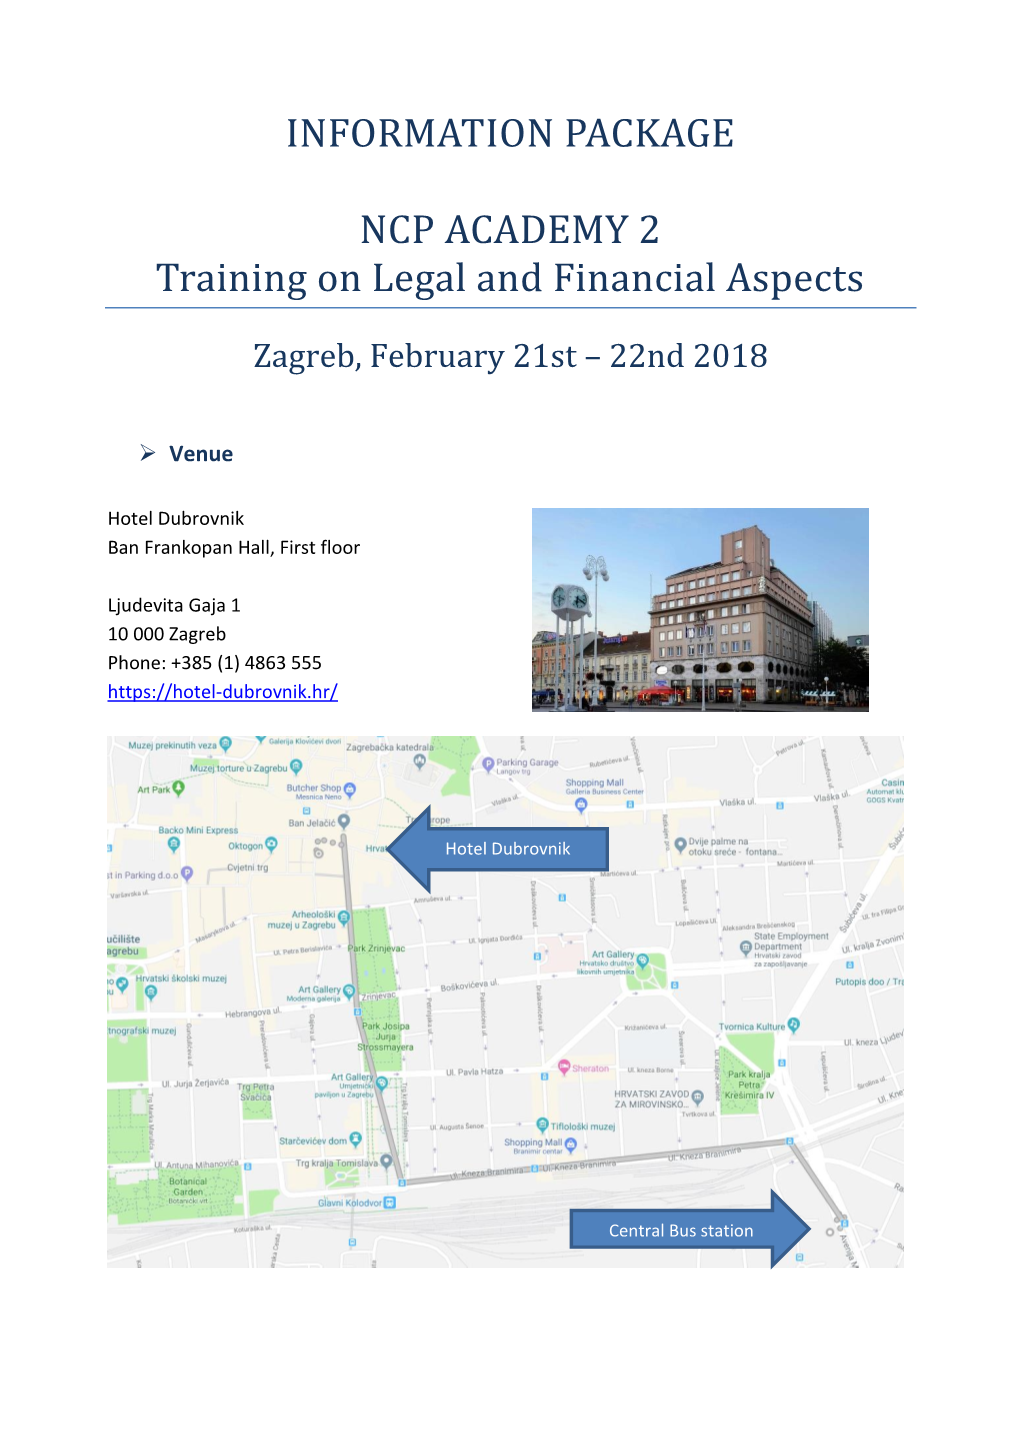 INFORMATION PACKAGE NCP ACADEMY 2 Training on Legal And